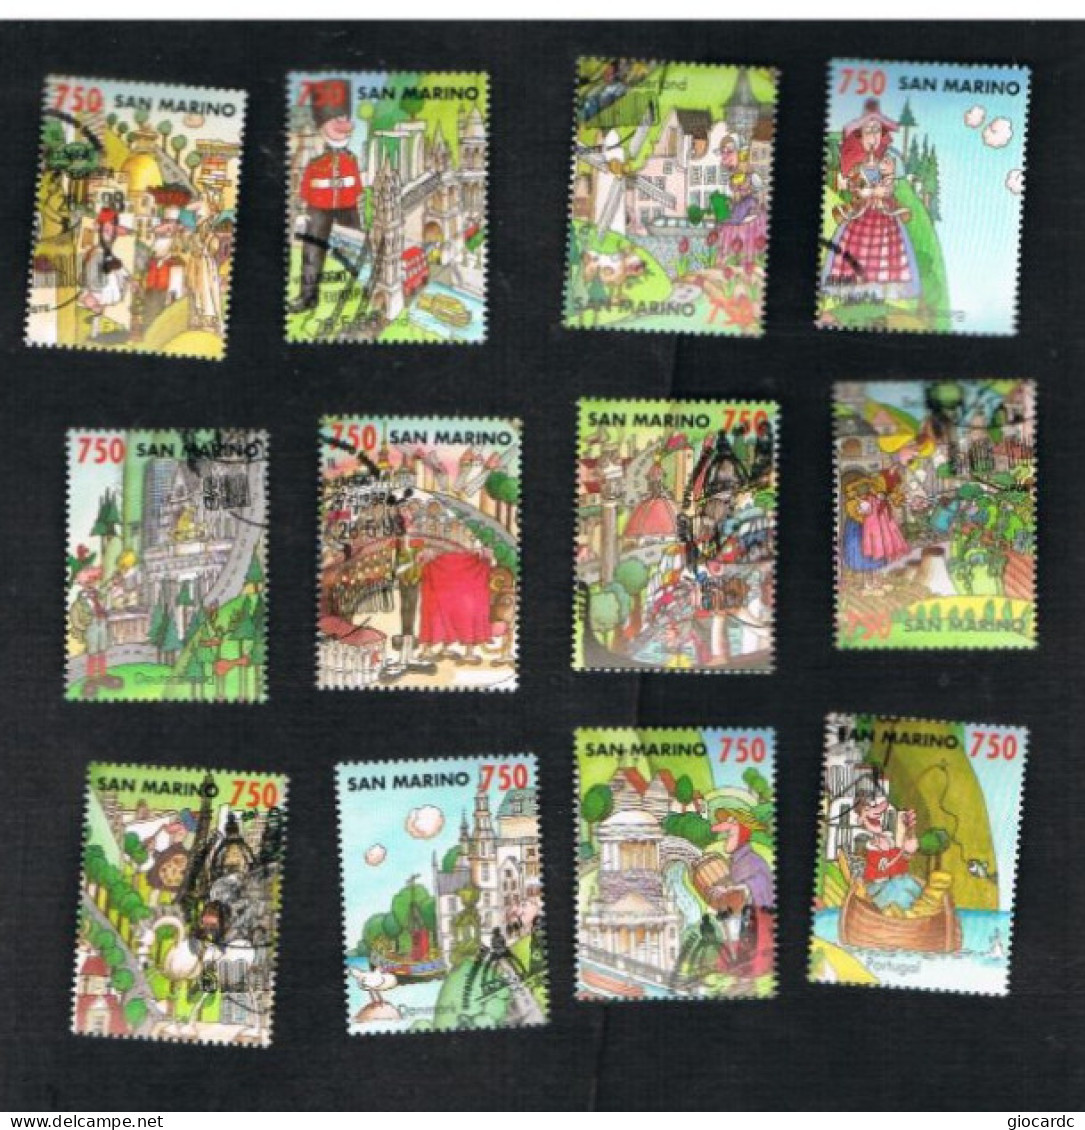 SAN MARINO - UN 1382.1393 - 1993 IL VILLAGGIO EUROPA (COMPLET SET OF 12 STAMPS, BY BF)     -  USED - Usados